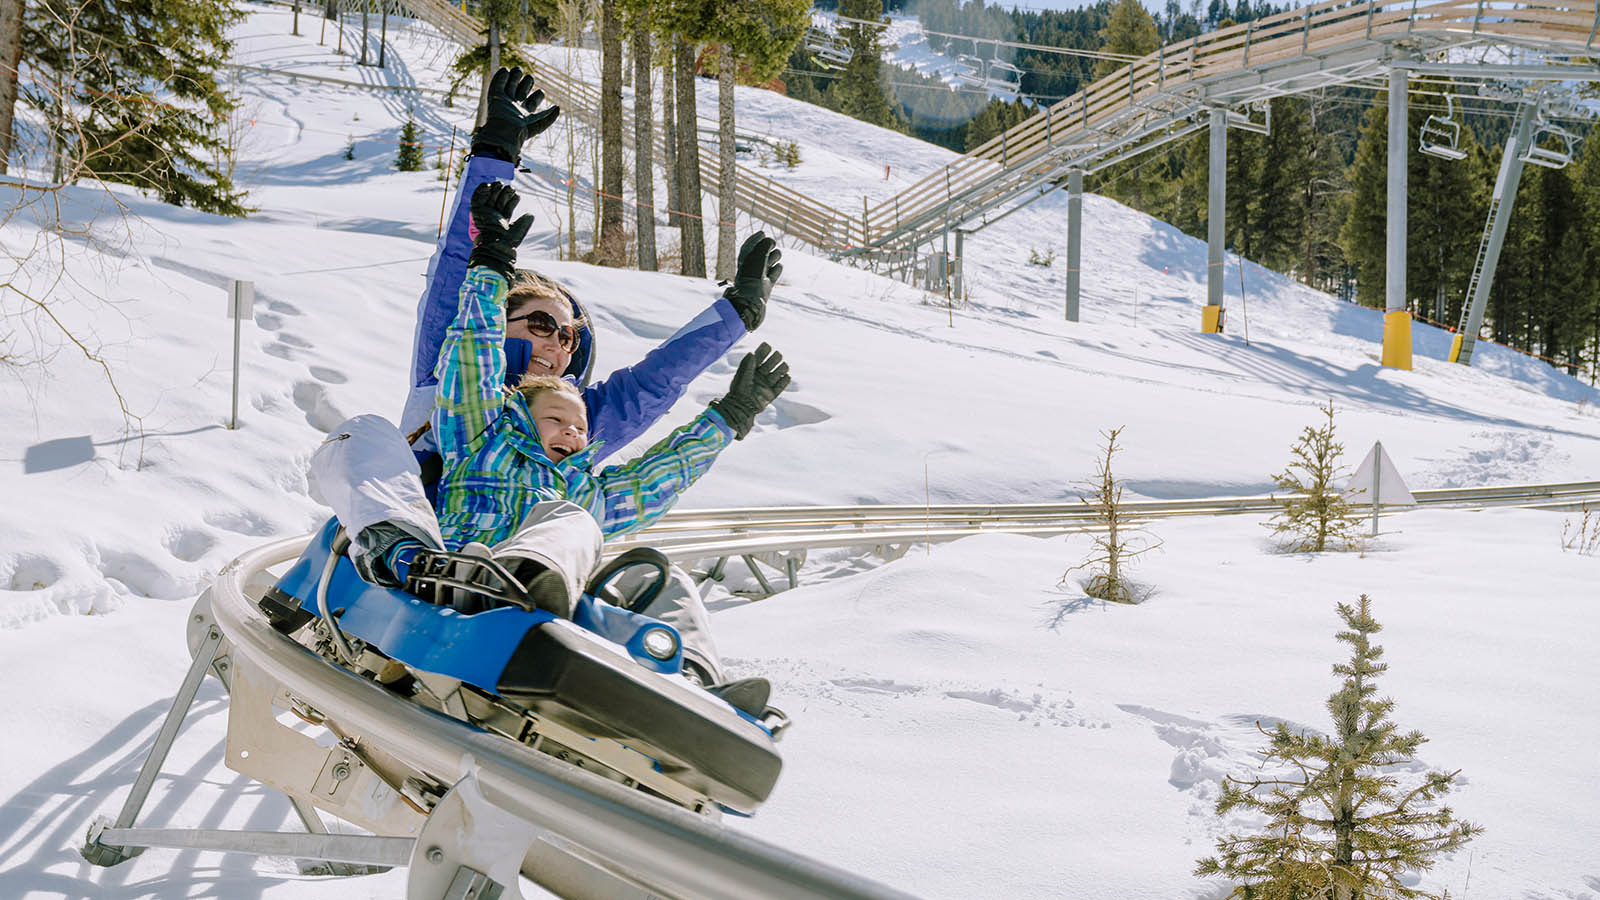 A mother and child ride down the Cowboy Coaser with their arms in the air at Snow King Mountain in Jackson Hole, WY.